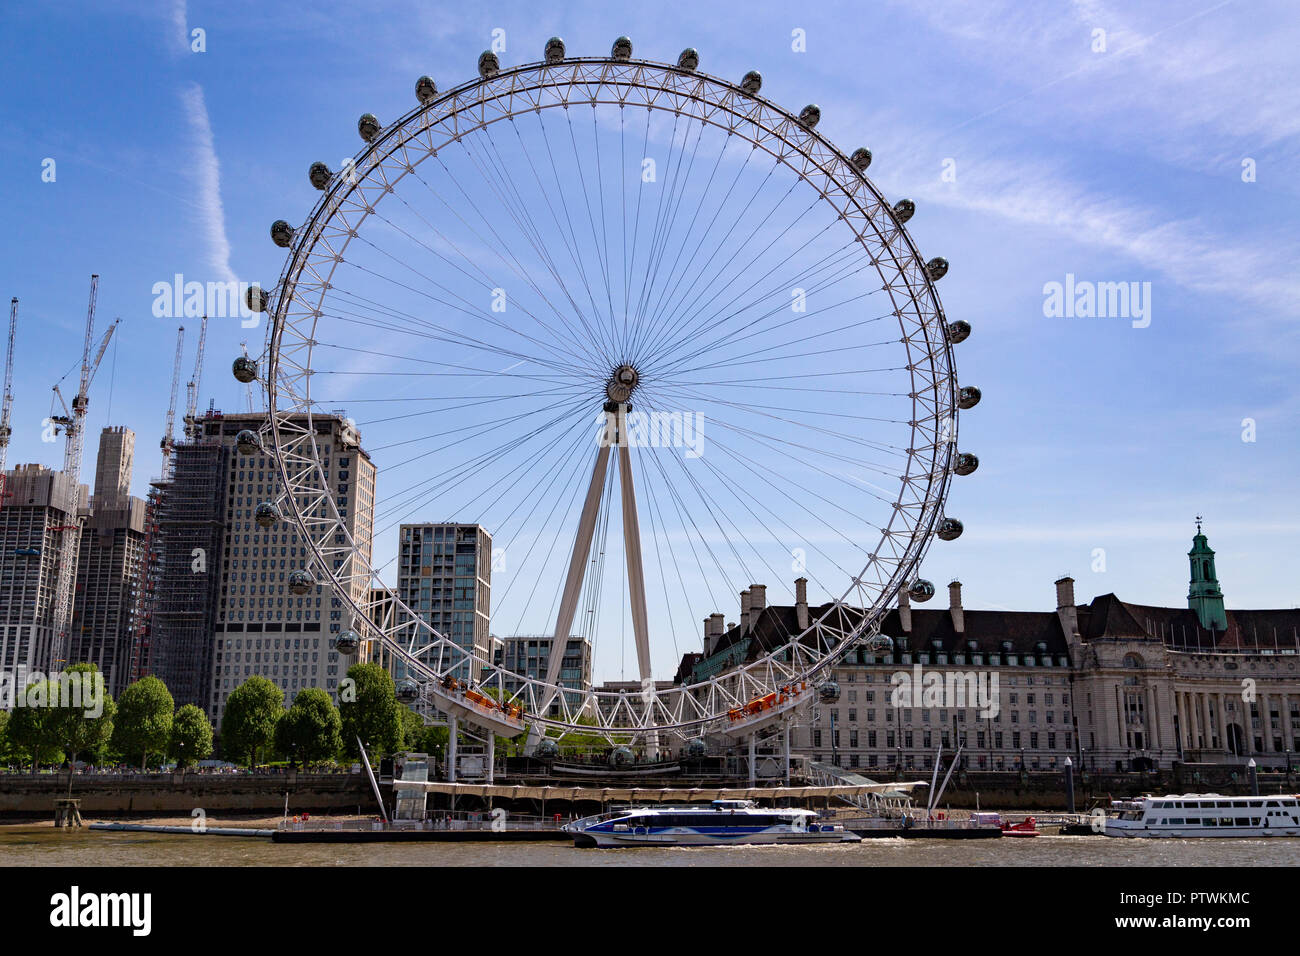 London Eye or Millennium Wheel on South Bank of River Thames in London England, UK Stock Photo